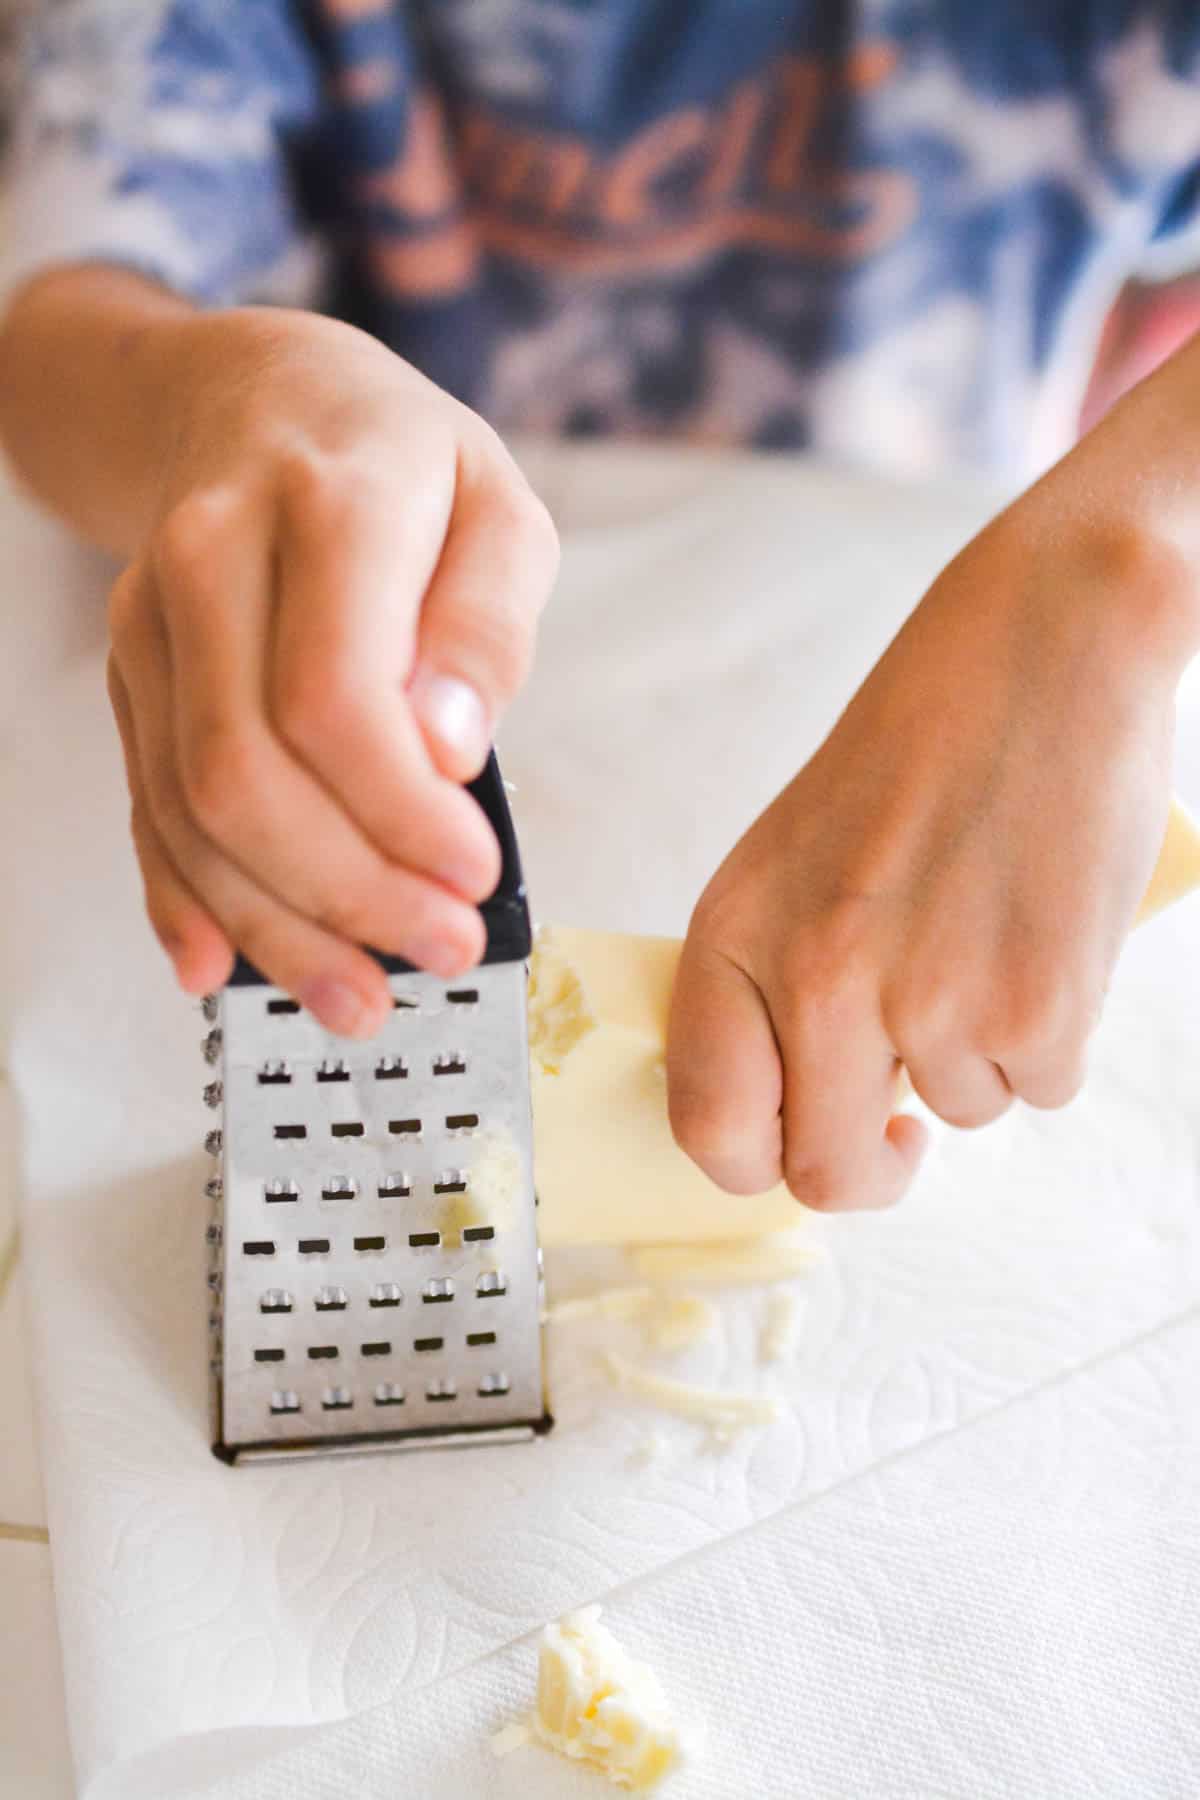 Kid grating swiss cheese at a kitchen counter.